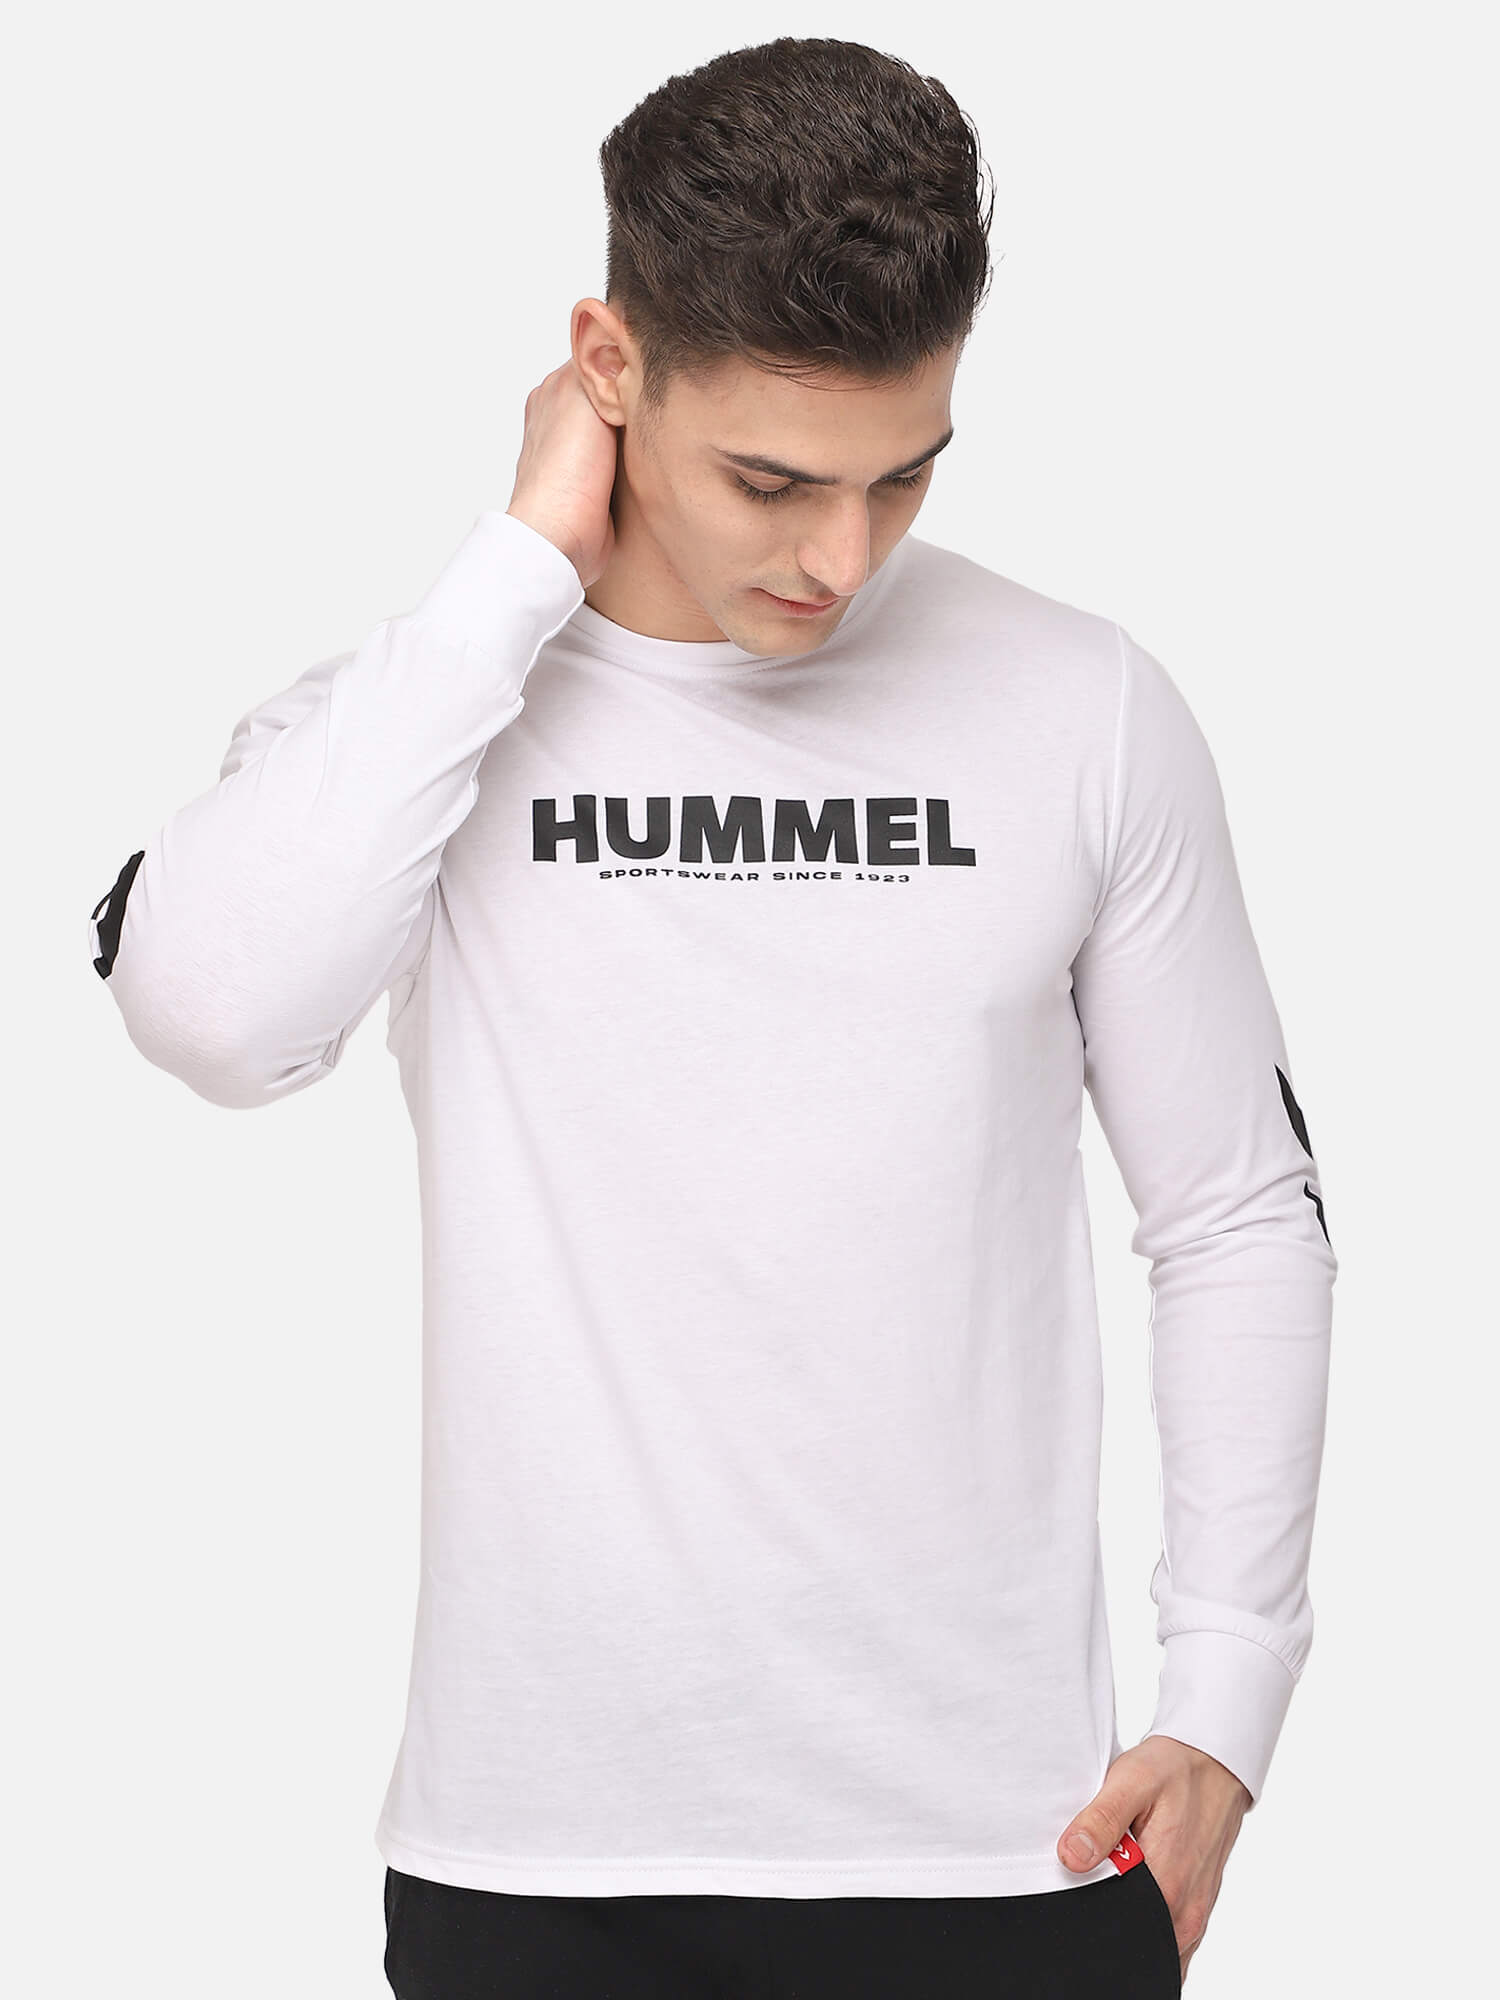 Legacy Long Sleeve White T-Shirts for Men